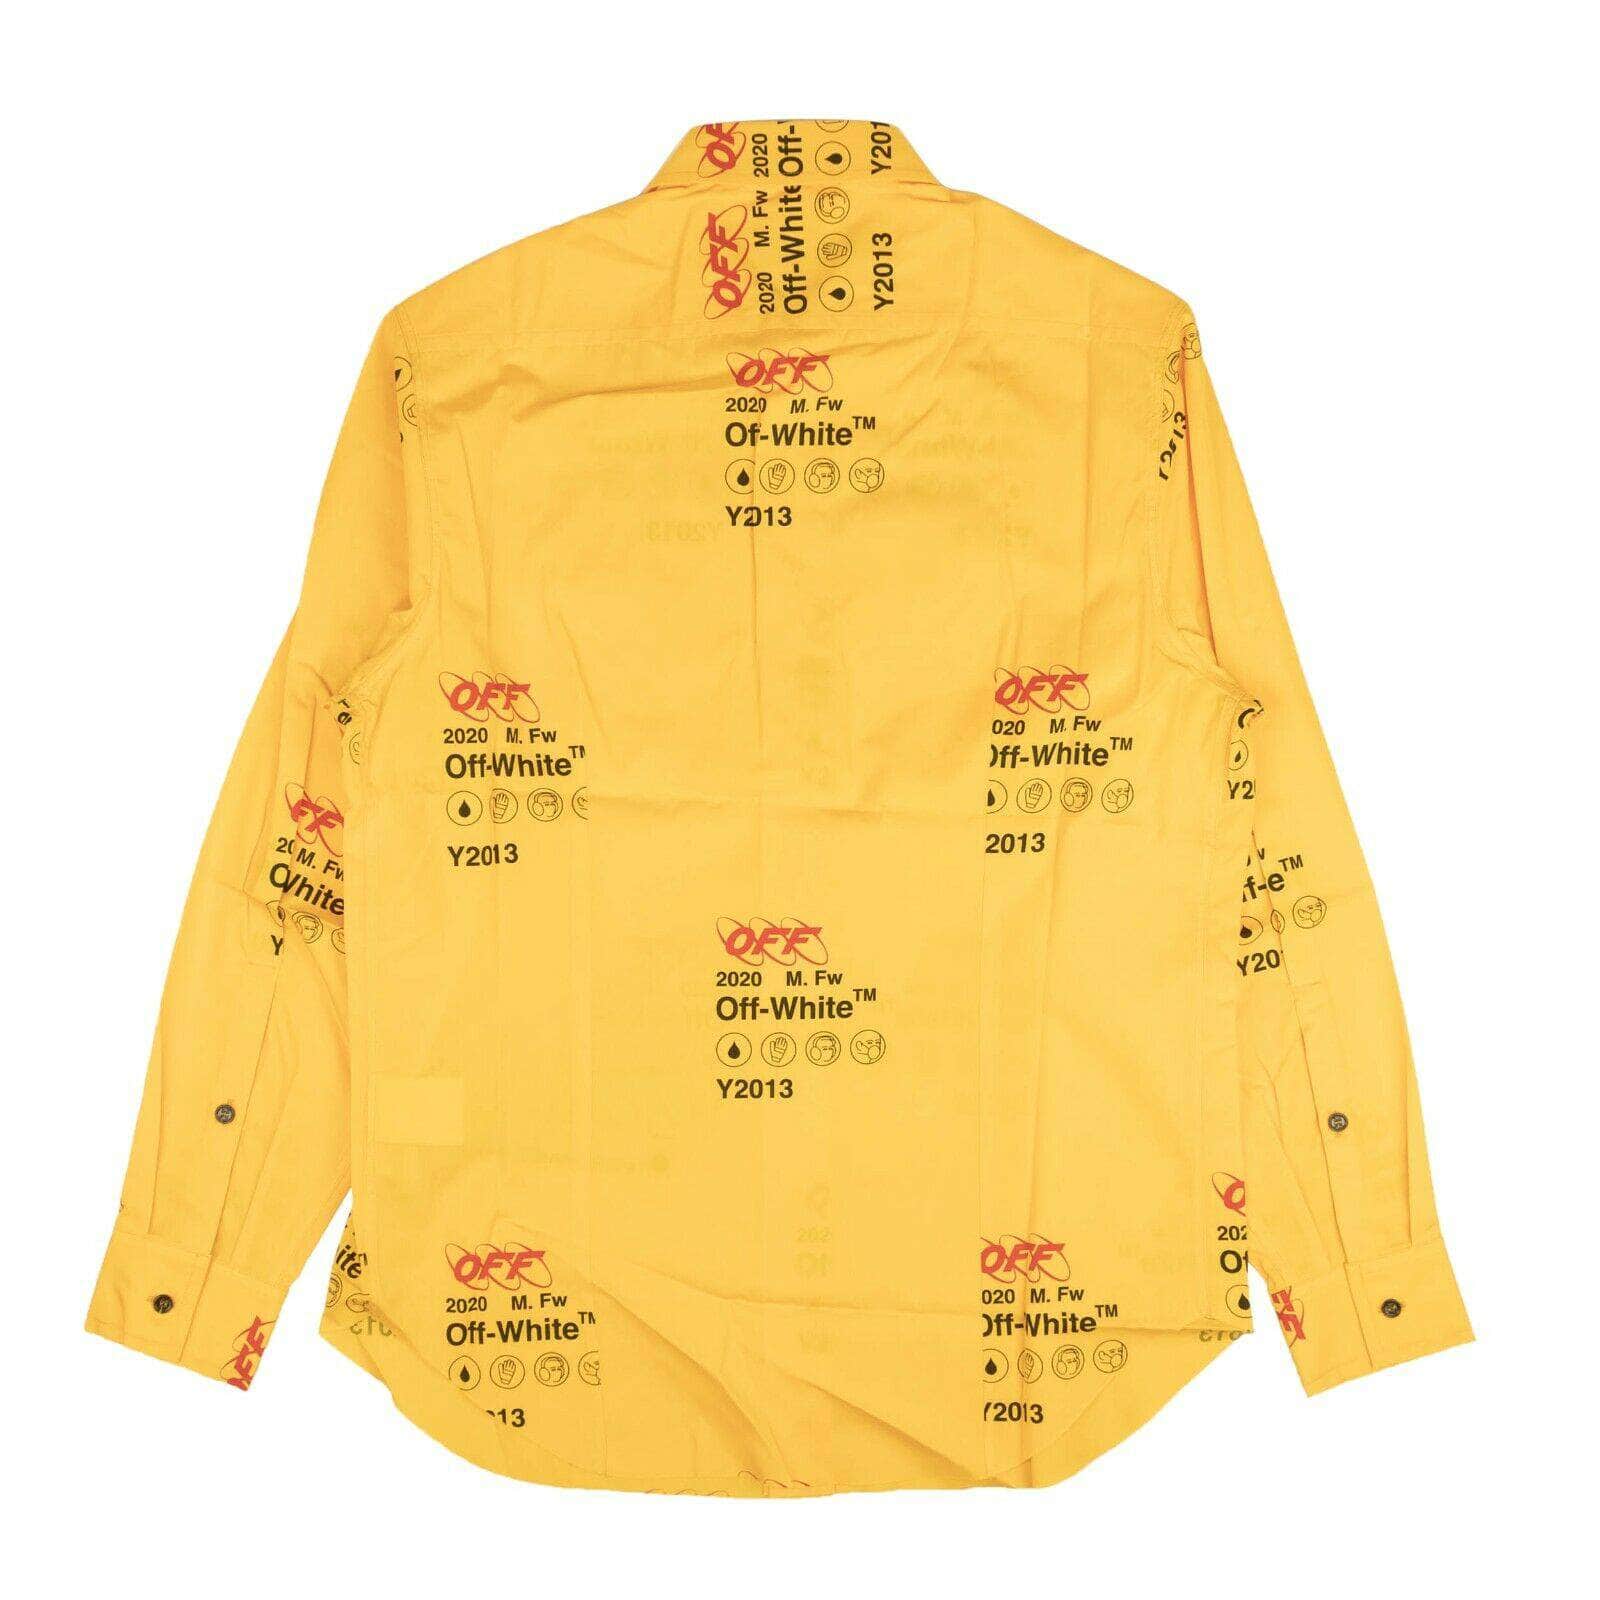 OFF-WHITE c/o VIRGIL ABLOH 500-750, channelenable-all, chicmi, couponcollection, gender-mens, main-clothing, mens-shoes, off-white-c-o-virgil-abloh, size-l, size-m, size-s M Yellow Industrial Print Shirt 82NGG-OW-1522/M 82NGG-OW-1522/M